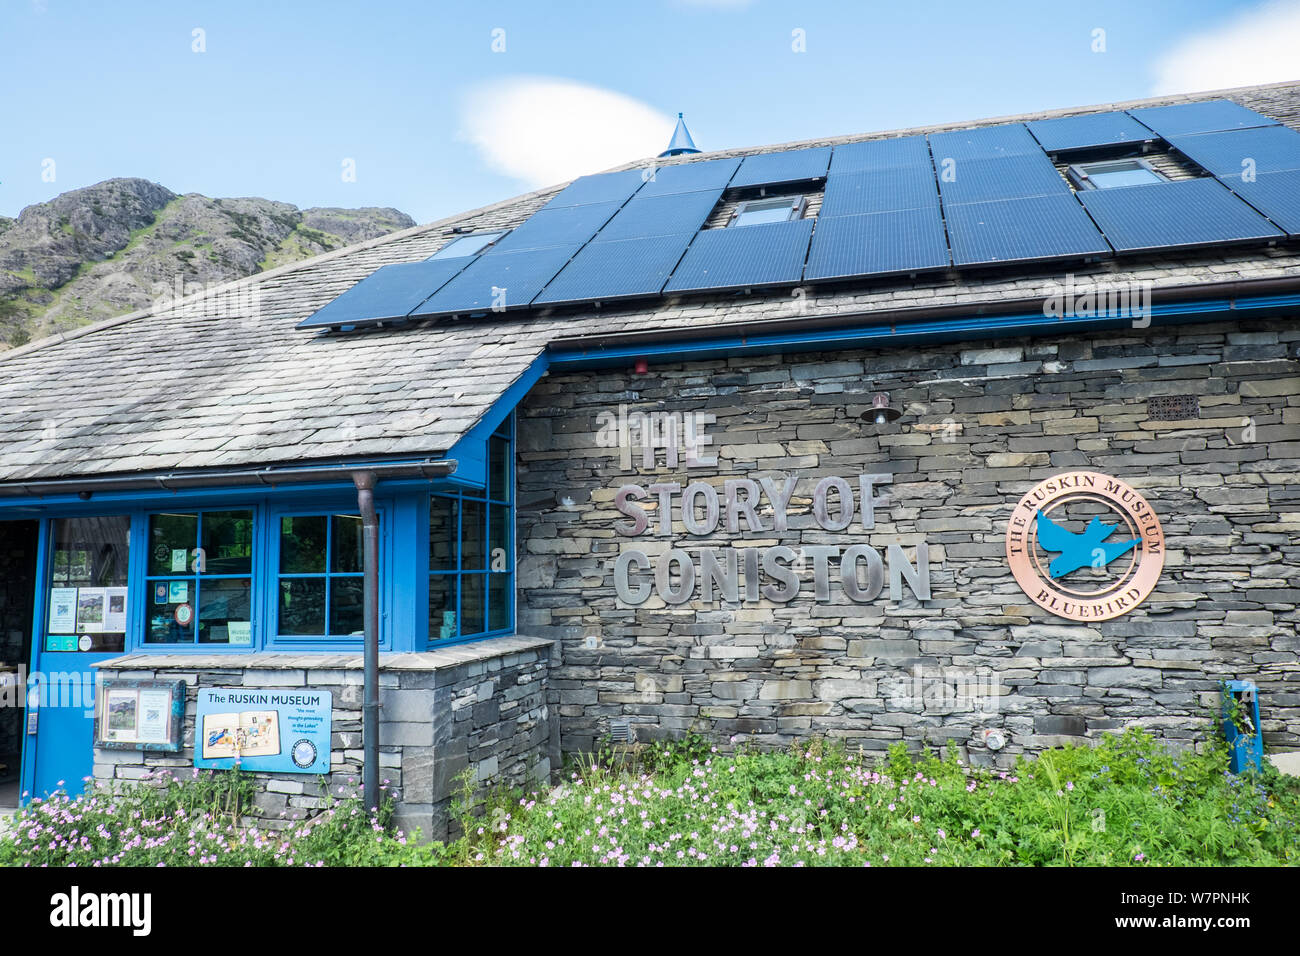 The Story Of Coniston Ruskin Museum Bluebird The Lakes Lake